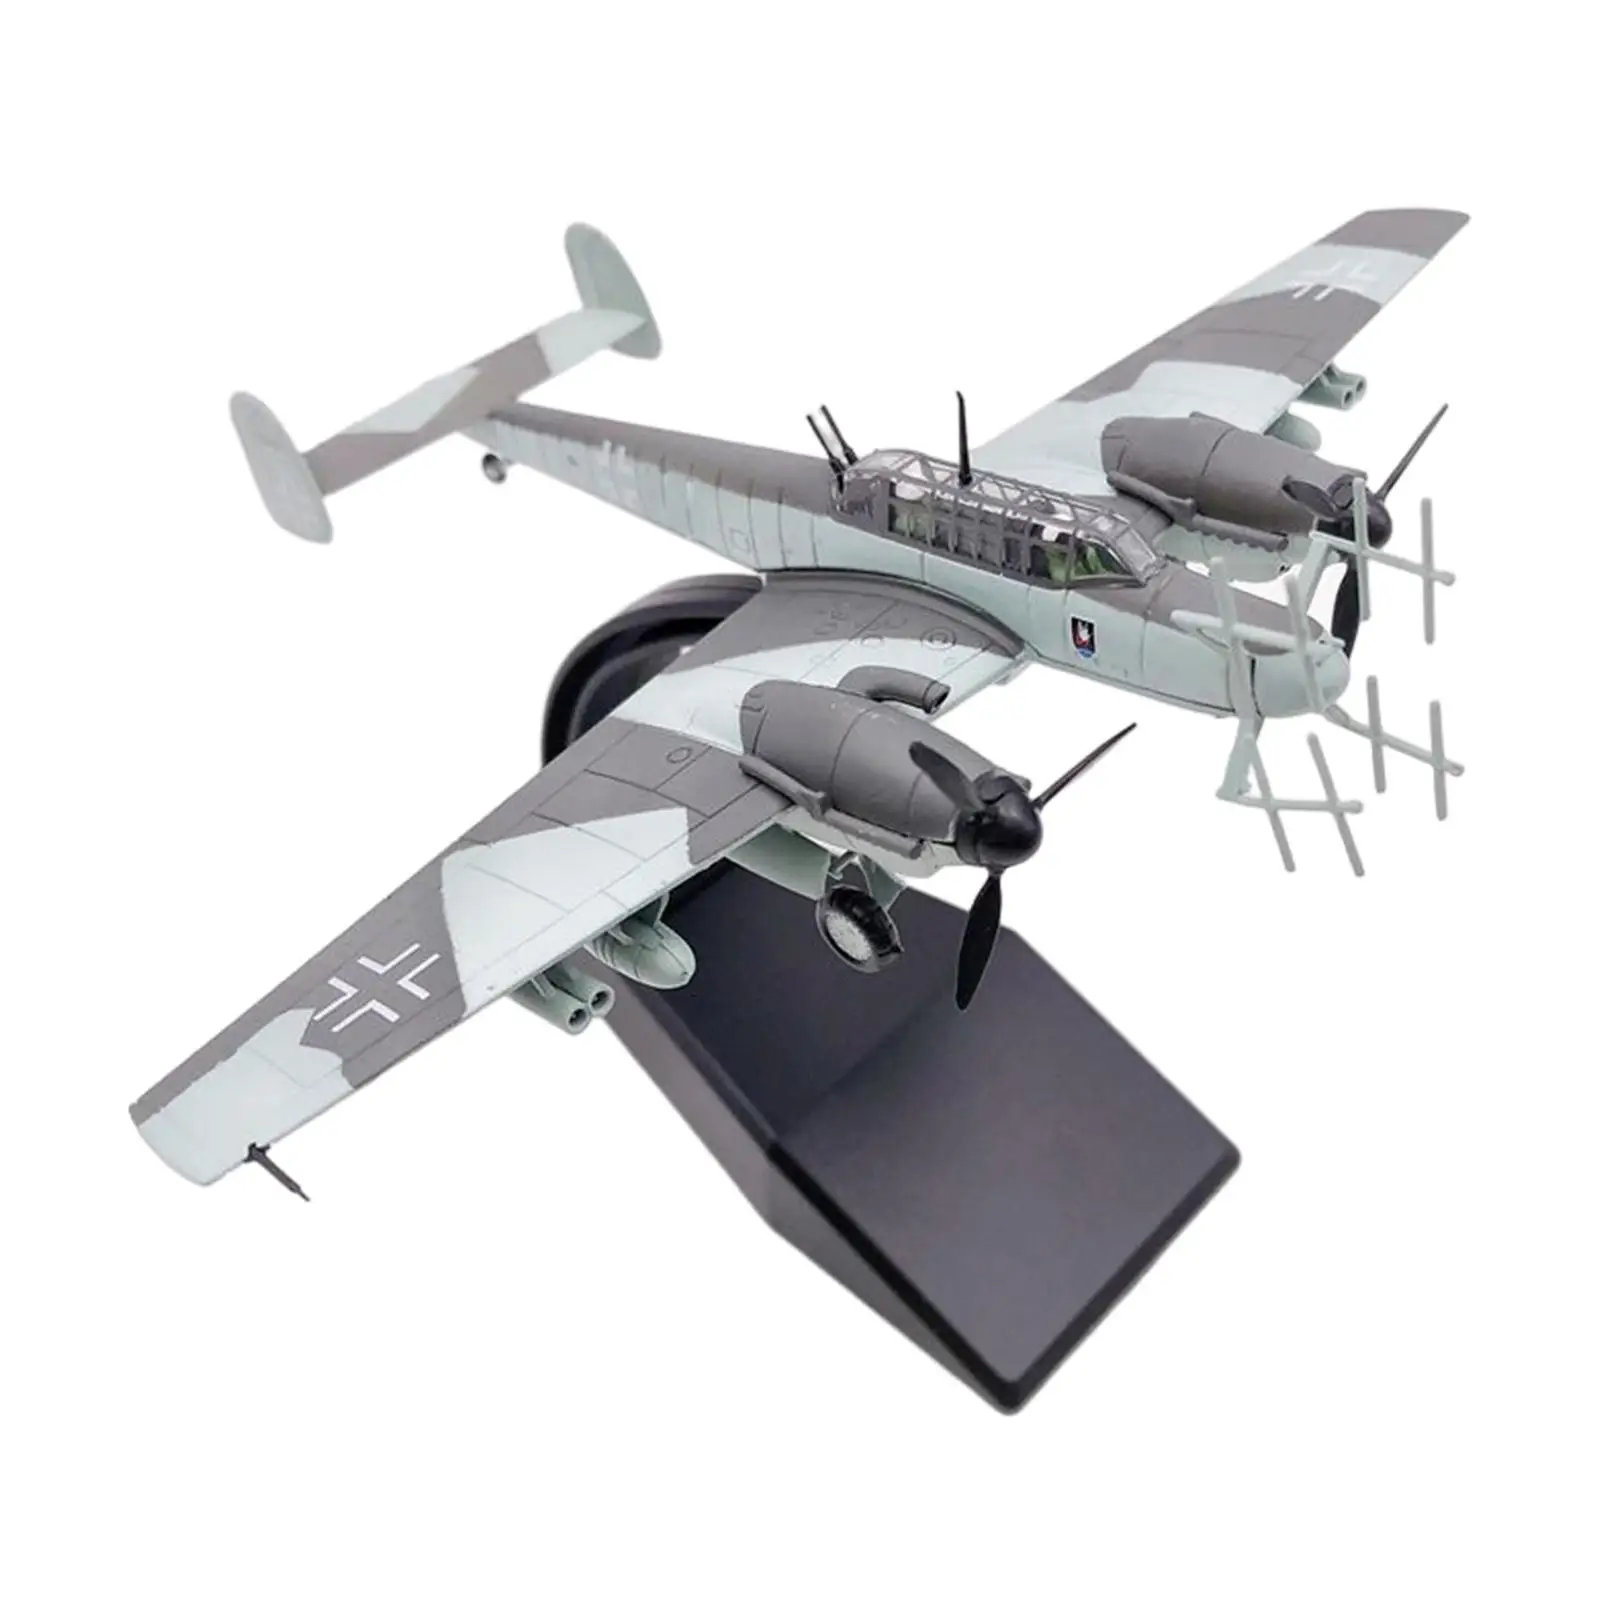 1/100 Scale BF-110 Plane Model Alloy BF-110 Fighter Model Toy for Household Shelf